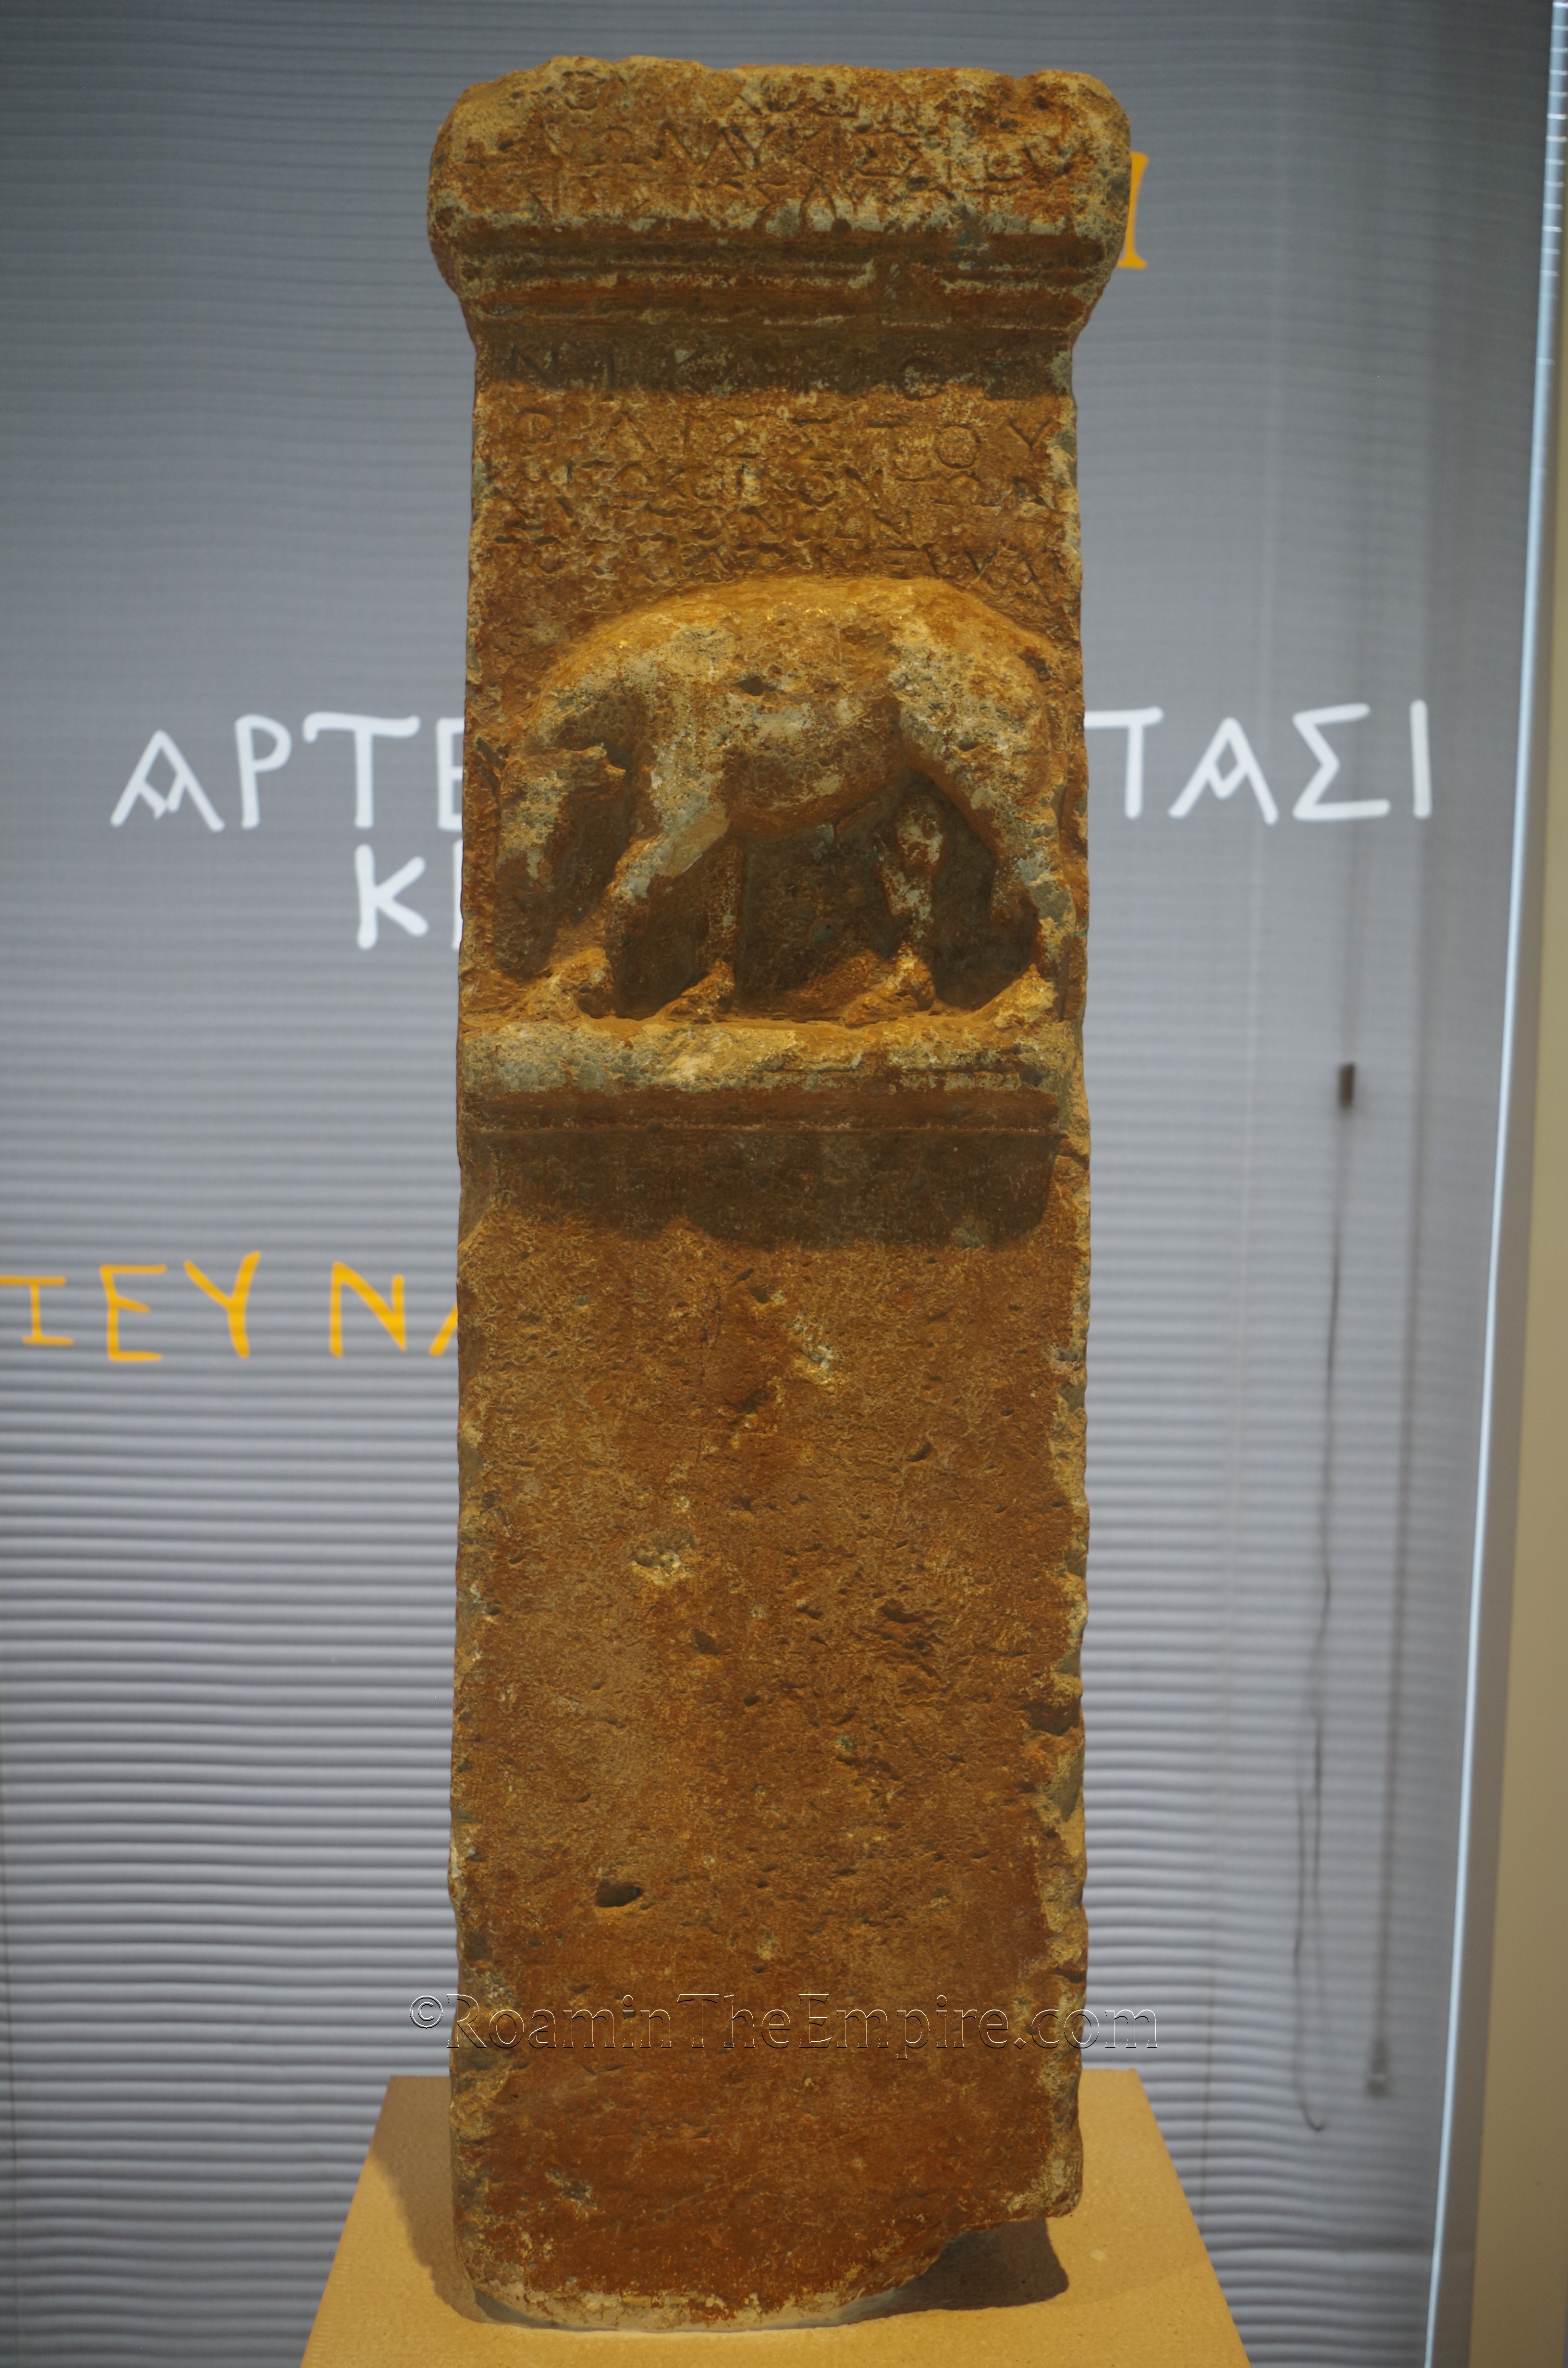 Votive stele dedicated to Poseidon with the relief of a bull. From Tepelene and dated to the 2nd century BCE. Archaeological Museum of Ioannina.